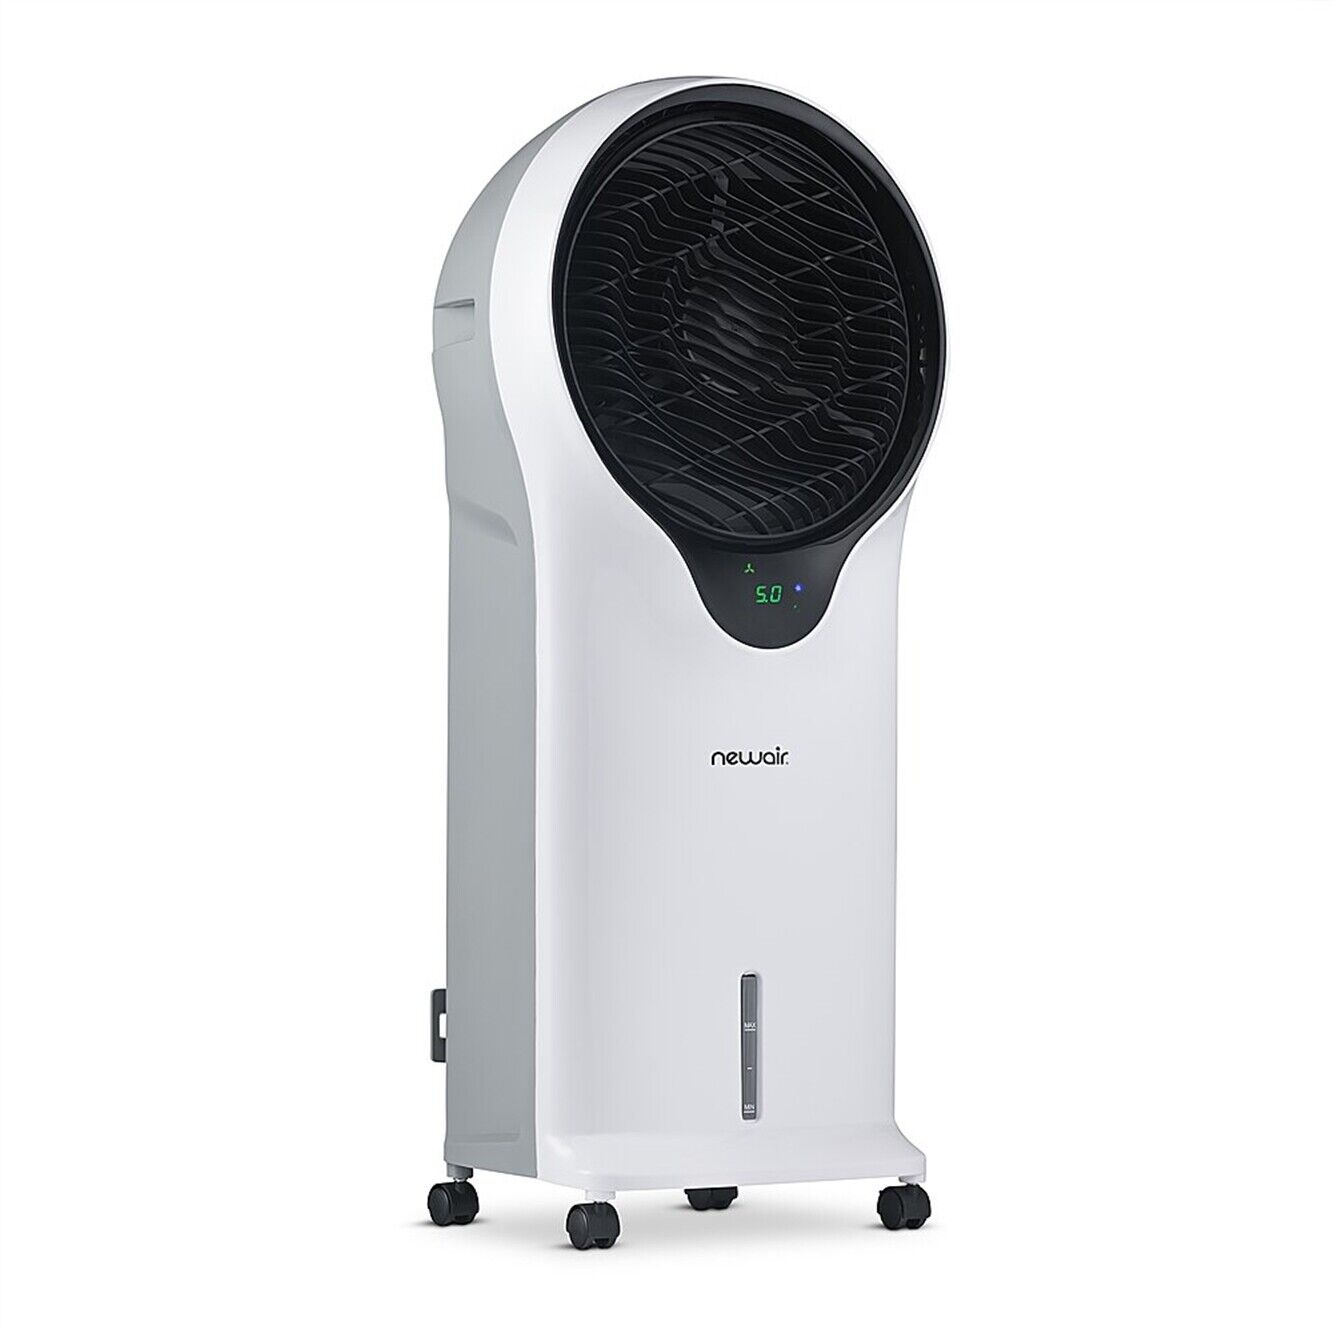 Newair Evaporative Portable Cooling Fan w/ CycloneCirculation, NEC500WH00, White